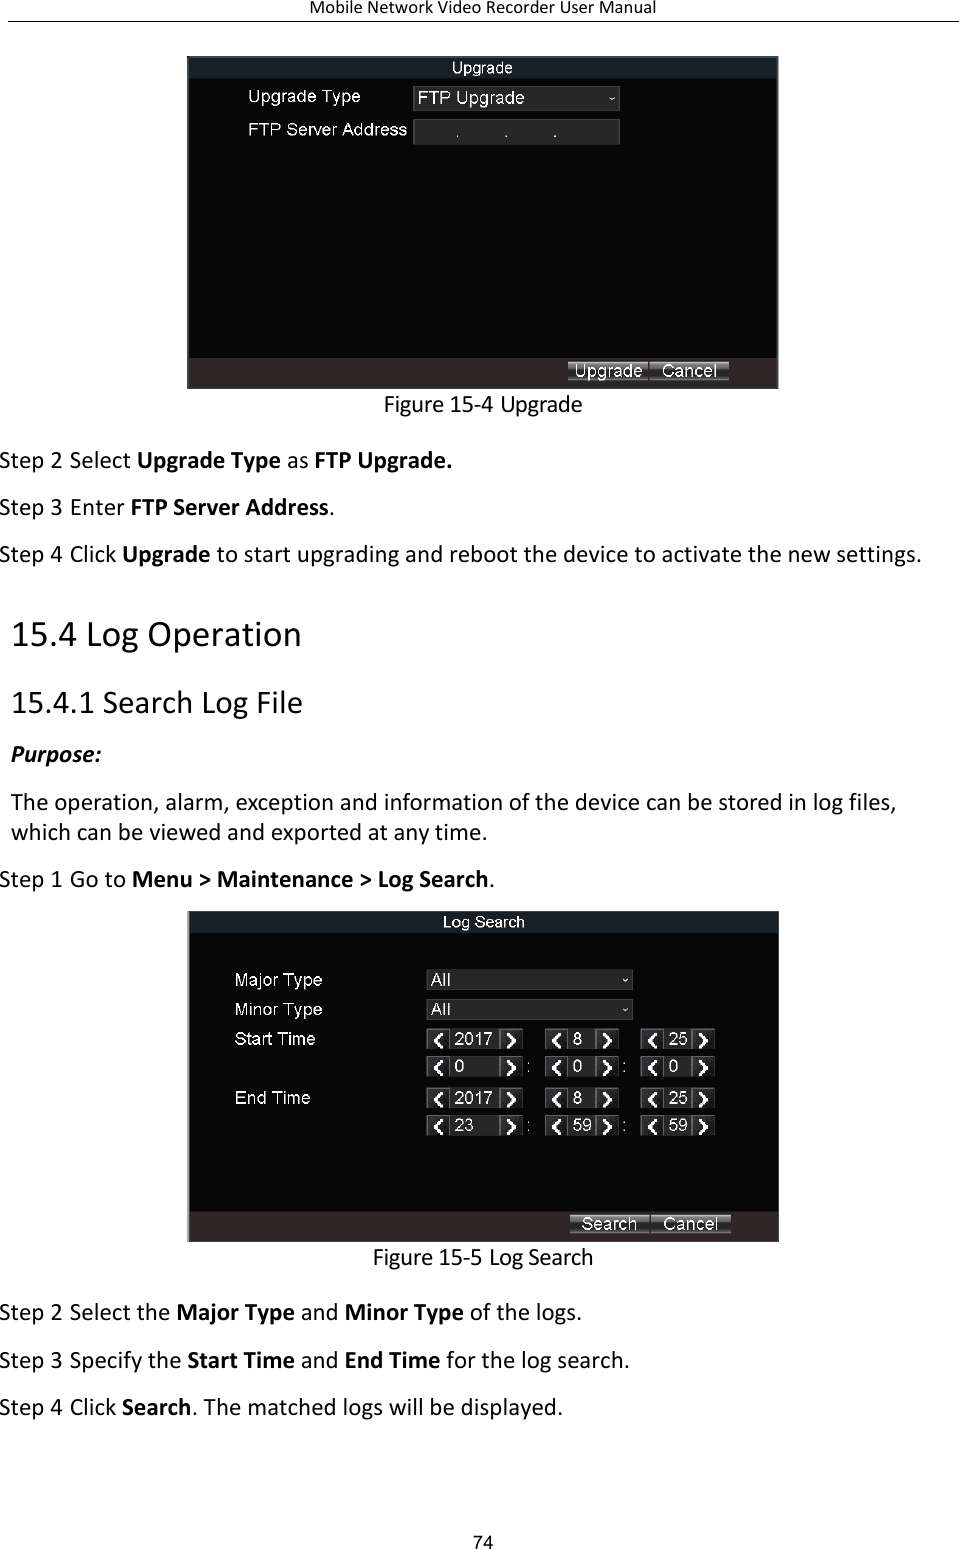 Mobile Network Video Recorder User Manual 74  Figure 15-4 Upgrade Step 2 Select Upgrade Type as FTP Upgrade. Step 3 Enter FTP Server Address. Step 4 Click Upgrade to start upgrading and reboot the device to activate the new settings. 15.4 Log Operation 15.4.1 Search Log File Purpose:   The operation, alarm, exception and information of the device can be stored in log files, which can be viewed and exported at any time. Step 1 Go to Menu &gt; Maintenance &gt; Log Search.  Figure 15-5 Log Search Step 2 Select the Major Type and Minor Type of the logs. Step 3 Specify the Start Time and End Time for the log search. Step 4 Click Search. The matched logs will be displayed. 